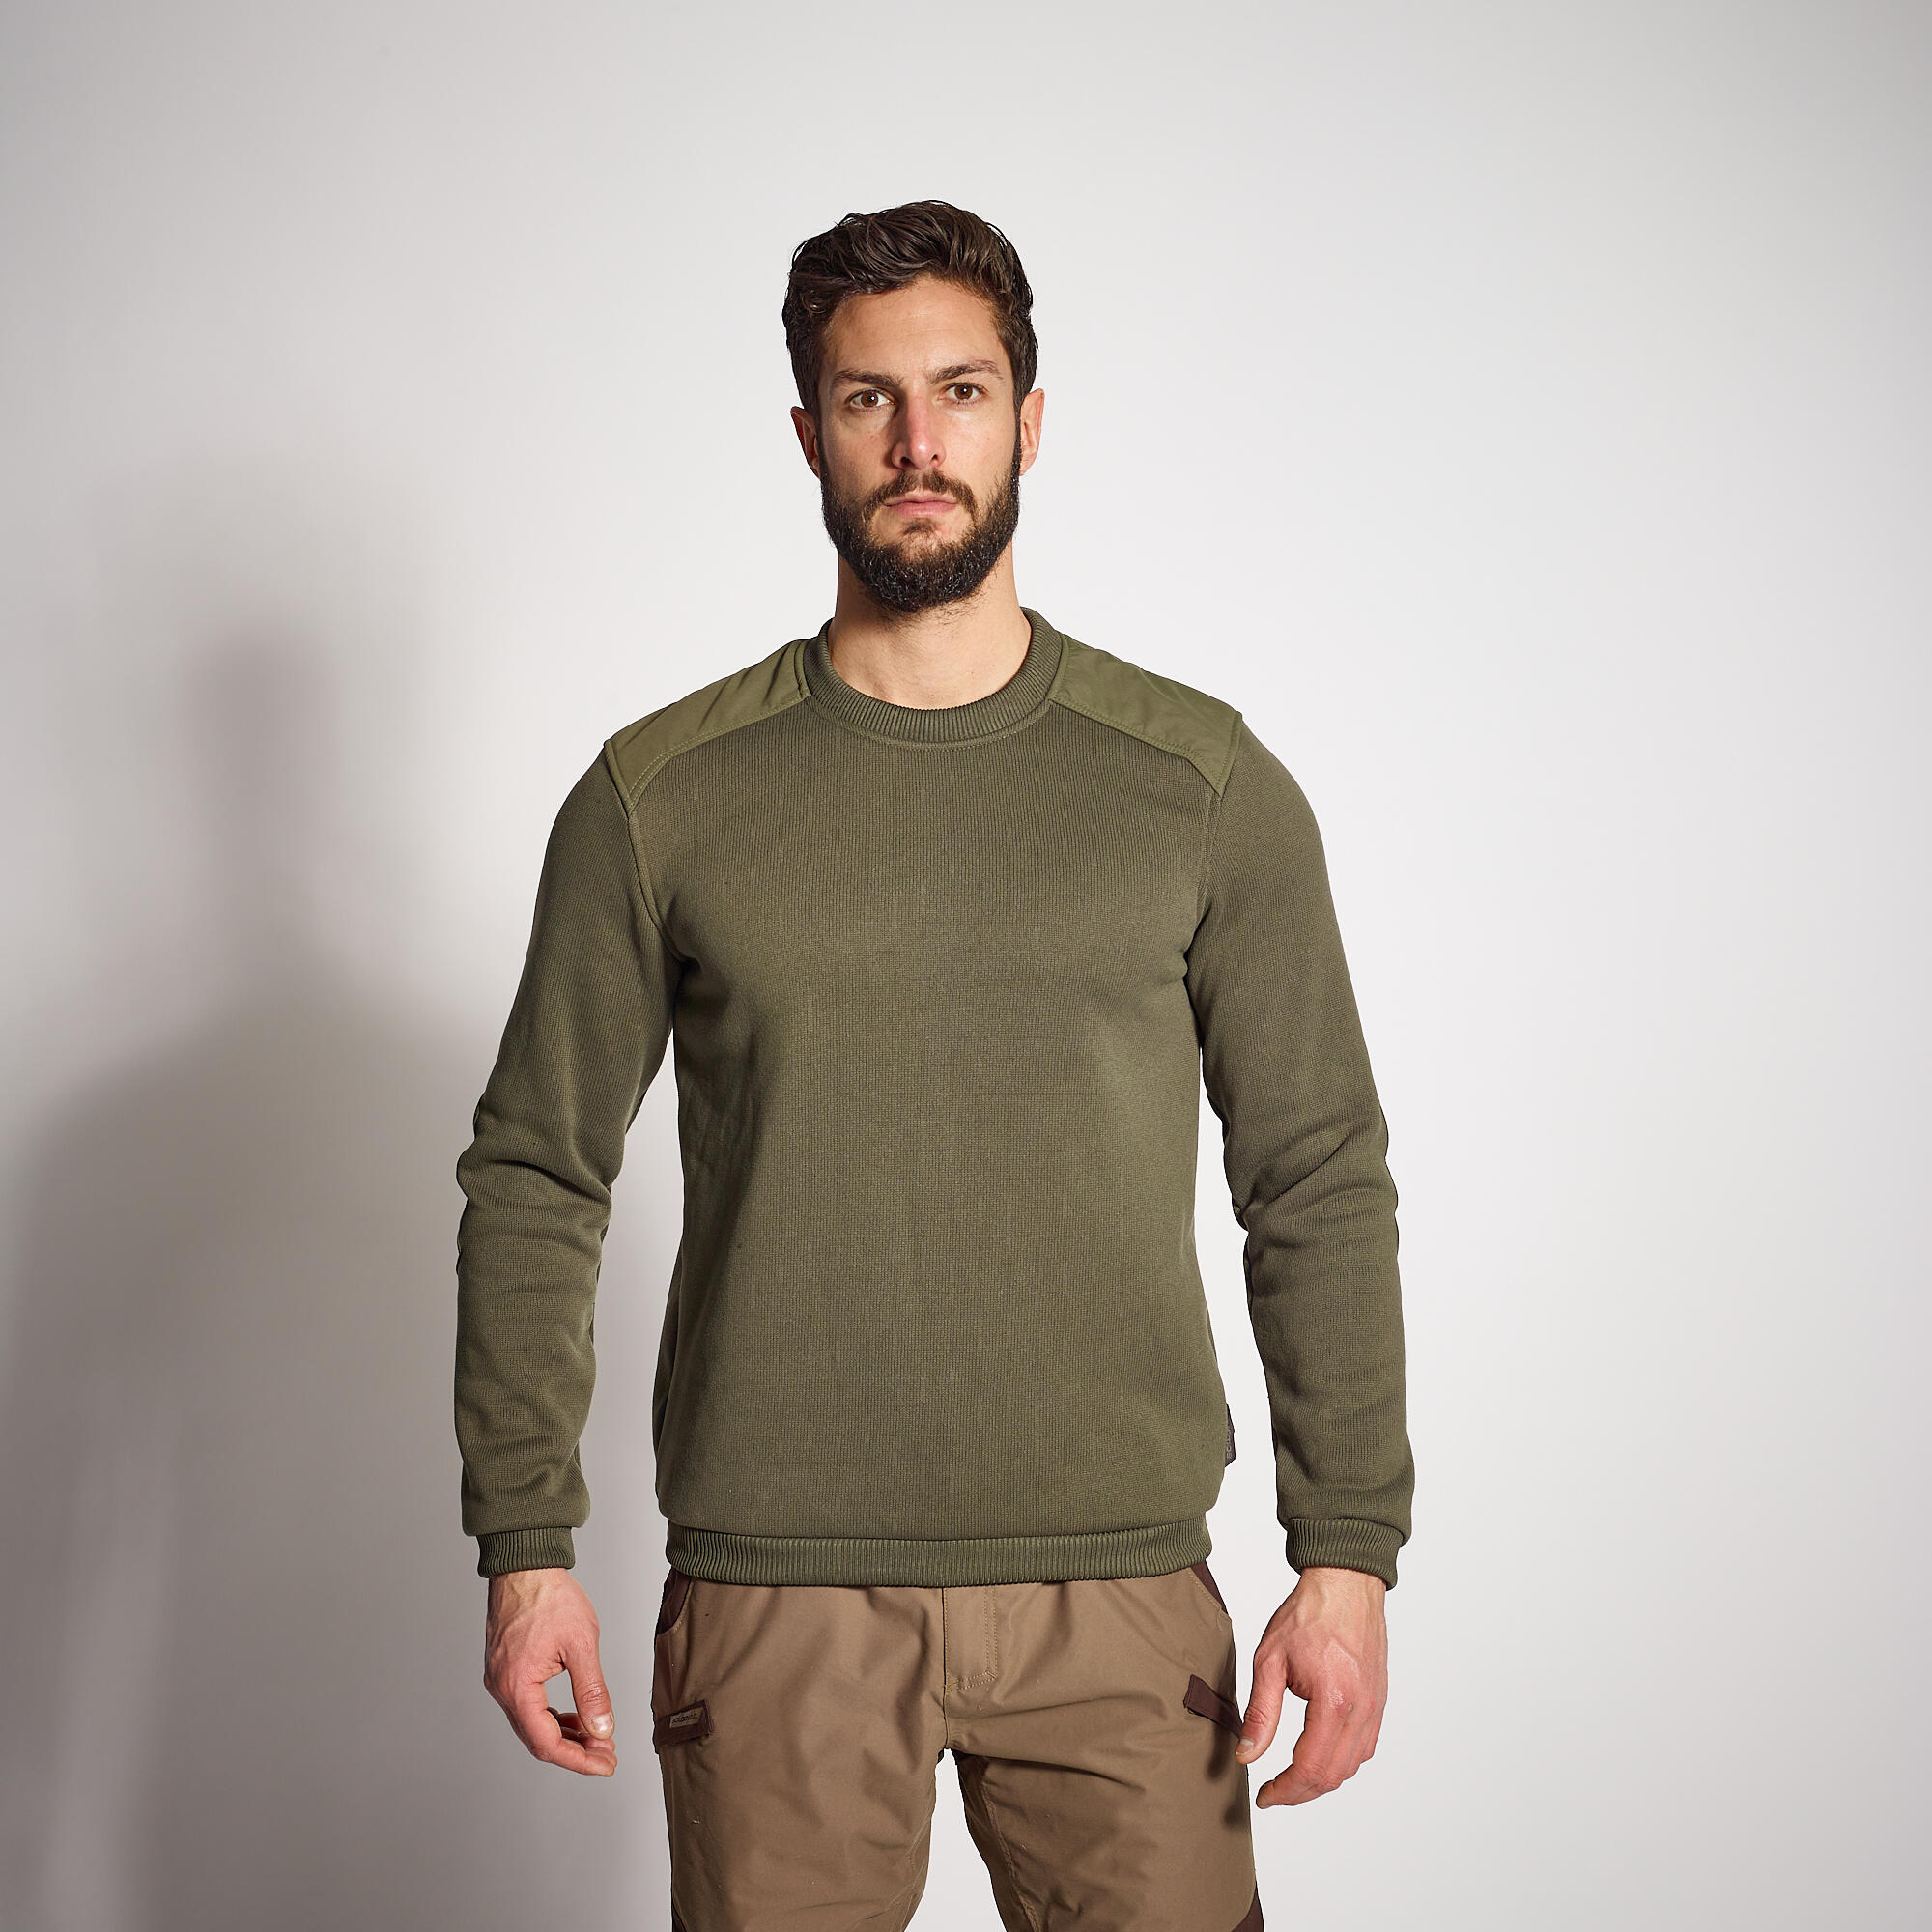 Pullover for Cold Weather - Green 1/4